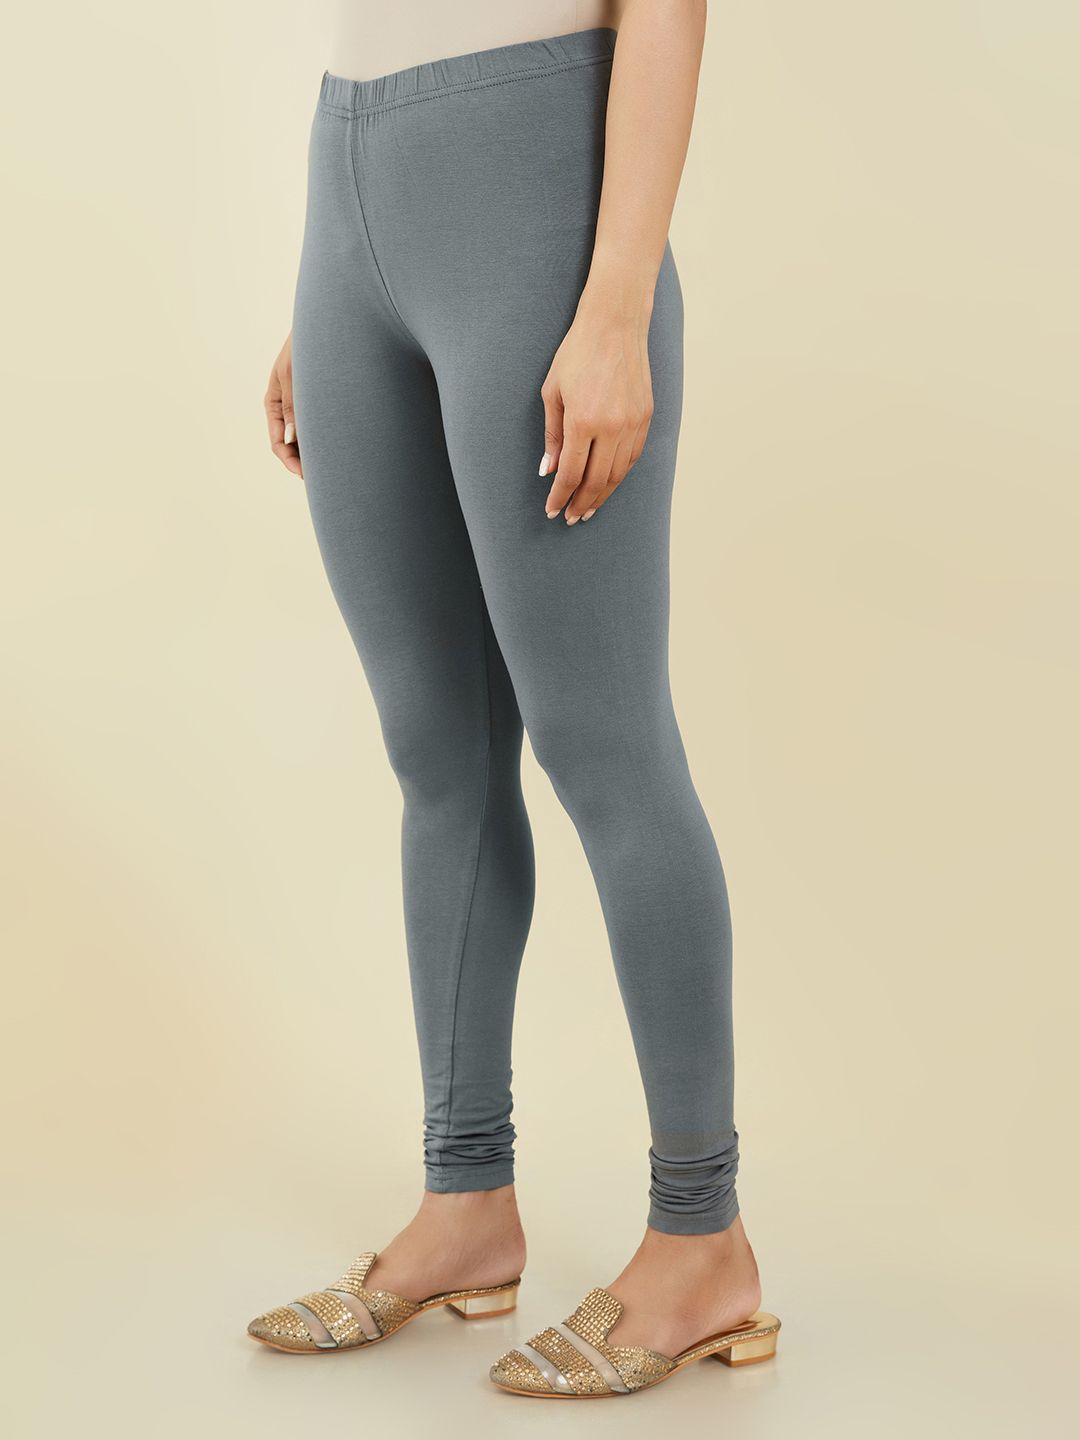 Shop Online Grey Pure Cotton Solid Churidar Legging Collection at Soch India